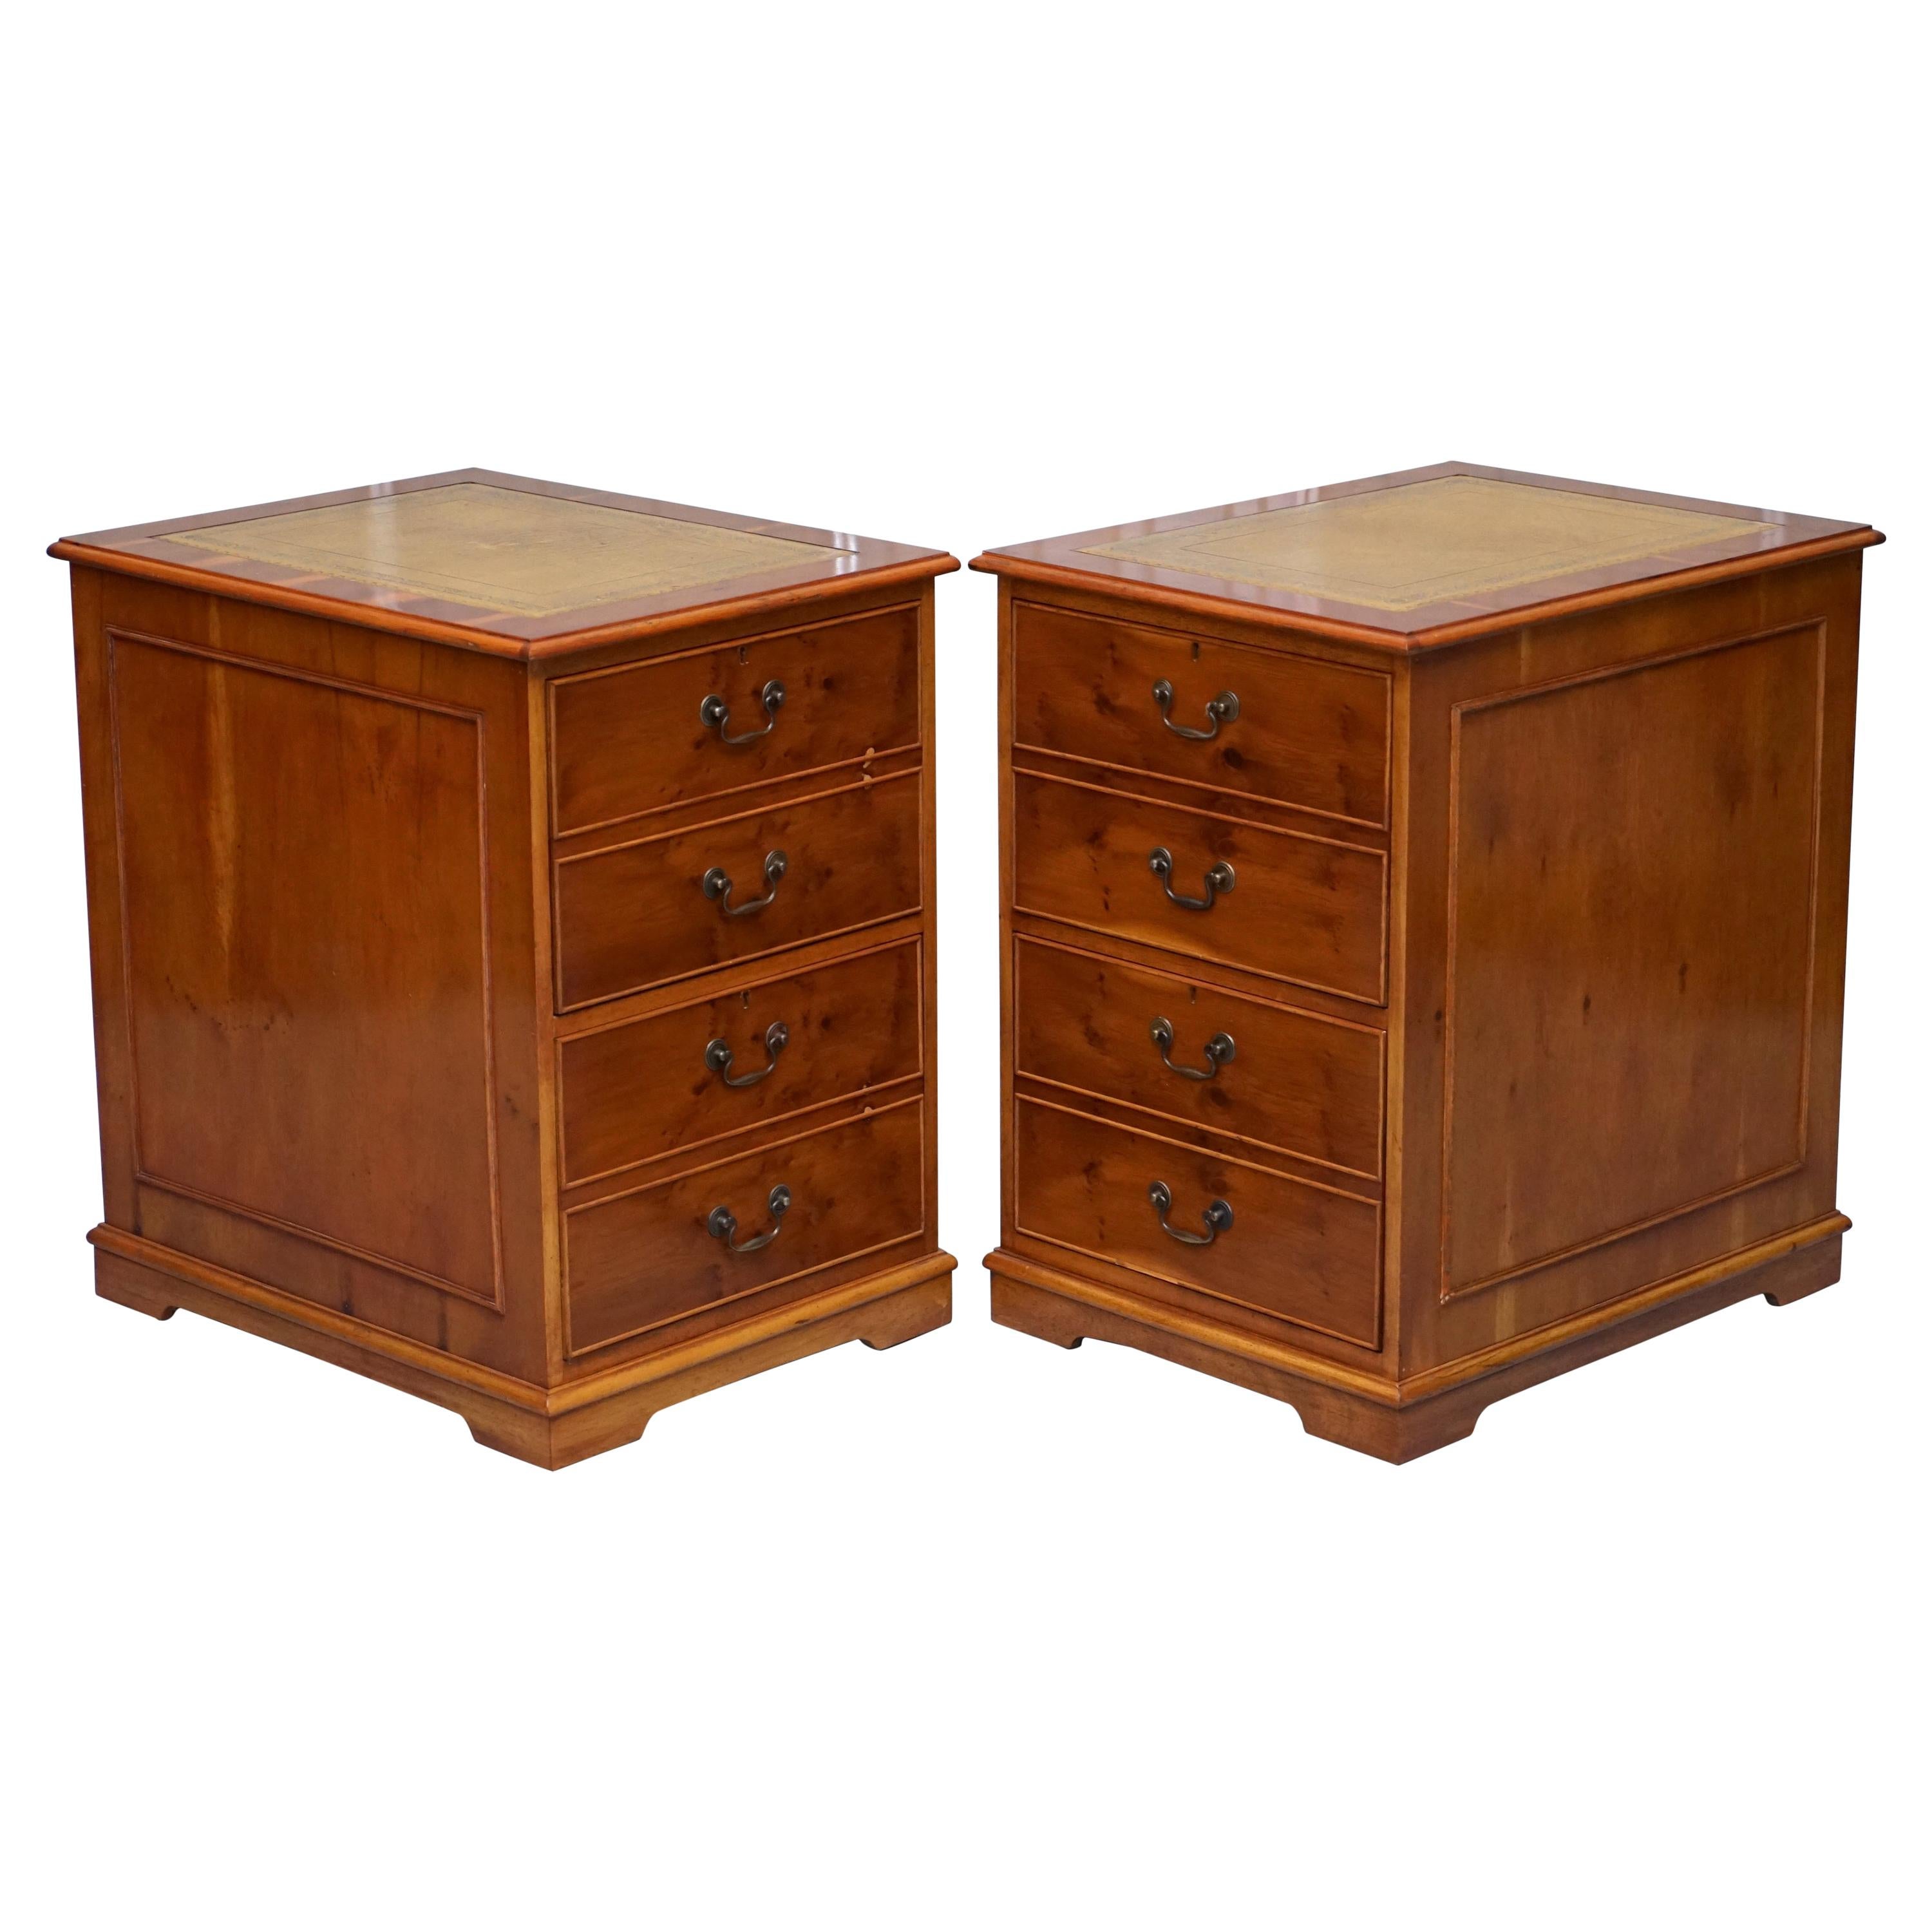 Stunning Pair of Burr Yew Wood Office Filing Cabinets with Green Leather Tops